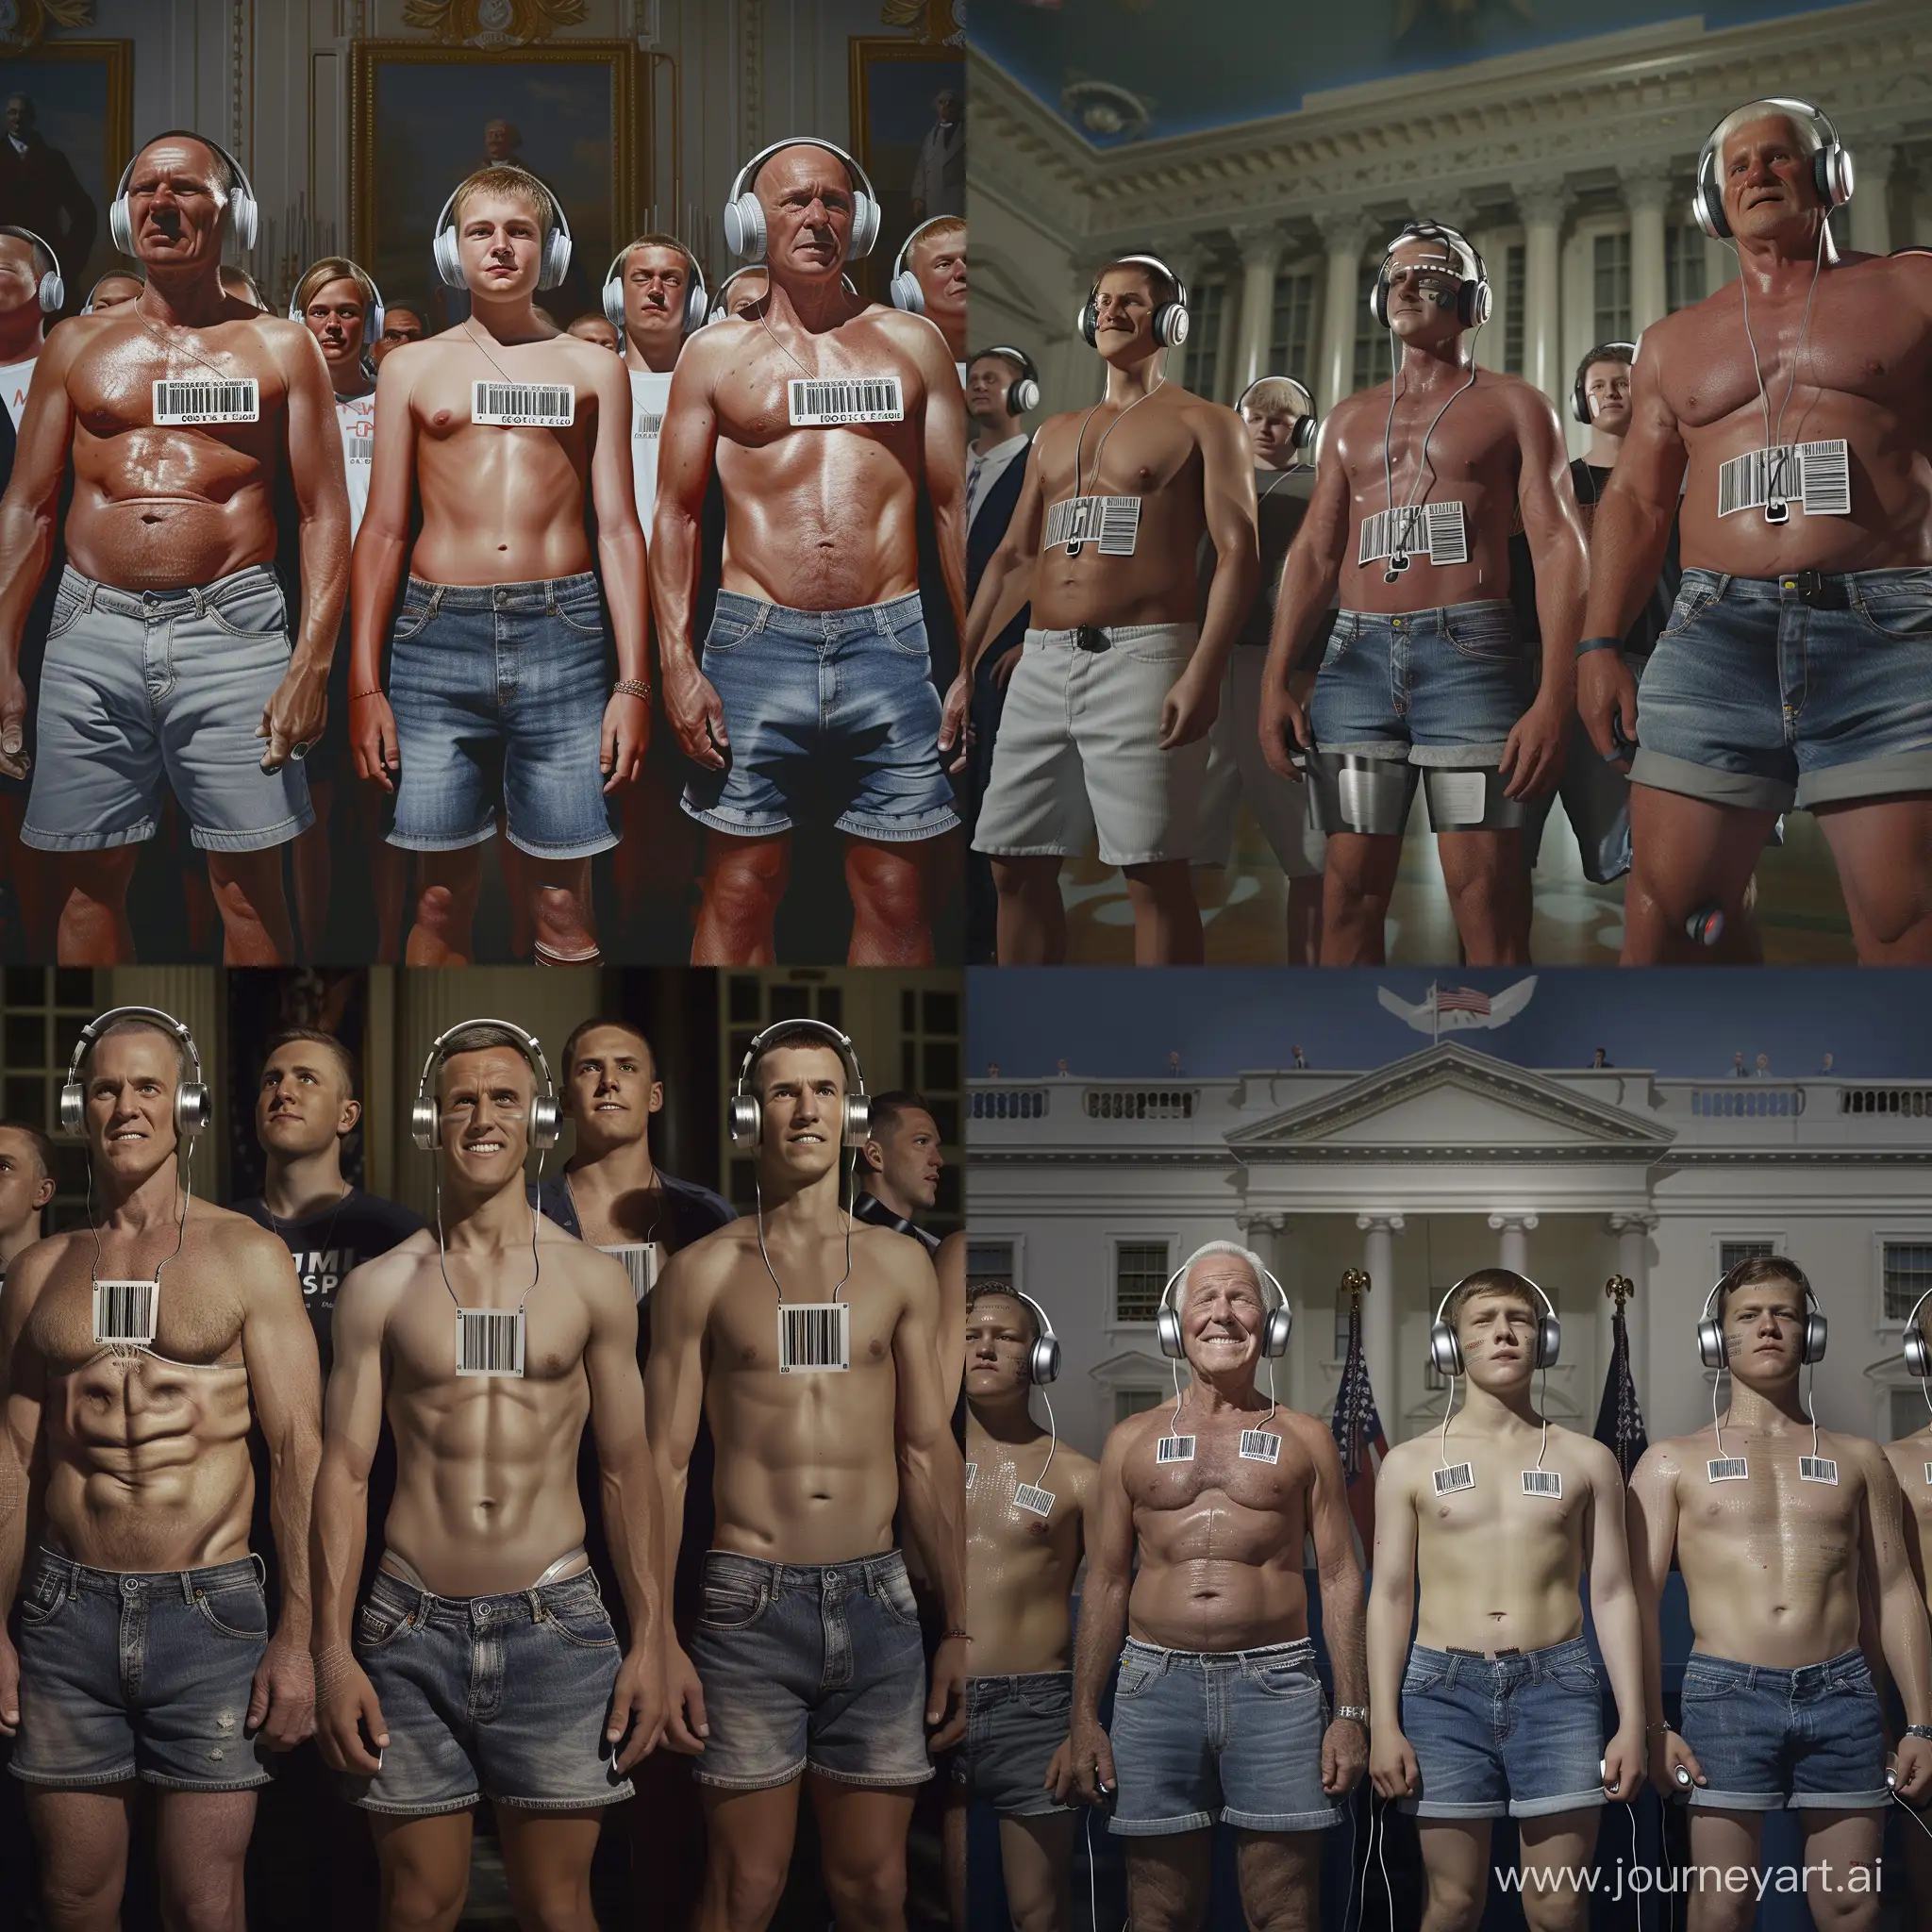 Handsome muscular middle-aged men and handsome muscular college-age boys each wear silver headphones and fitted denim cutoff shorts, dazed smiles, small barcode attached to each man's chest, White House press conference setting, facing the viewer, mass indoctrination, color image, hyperrealistic, cinematic